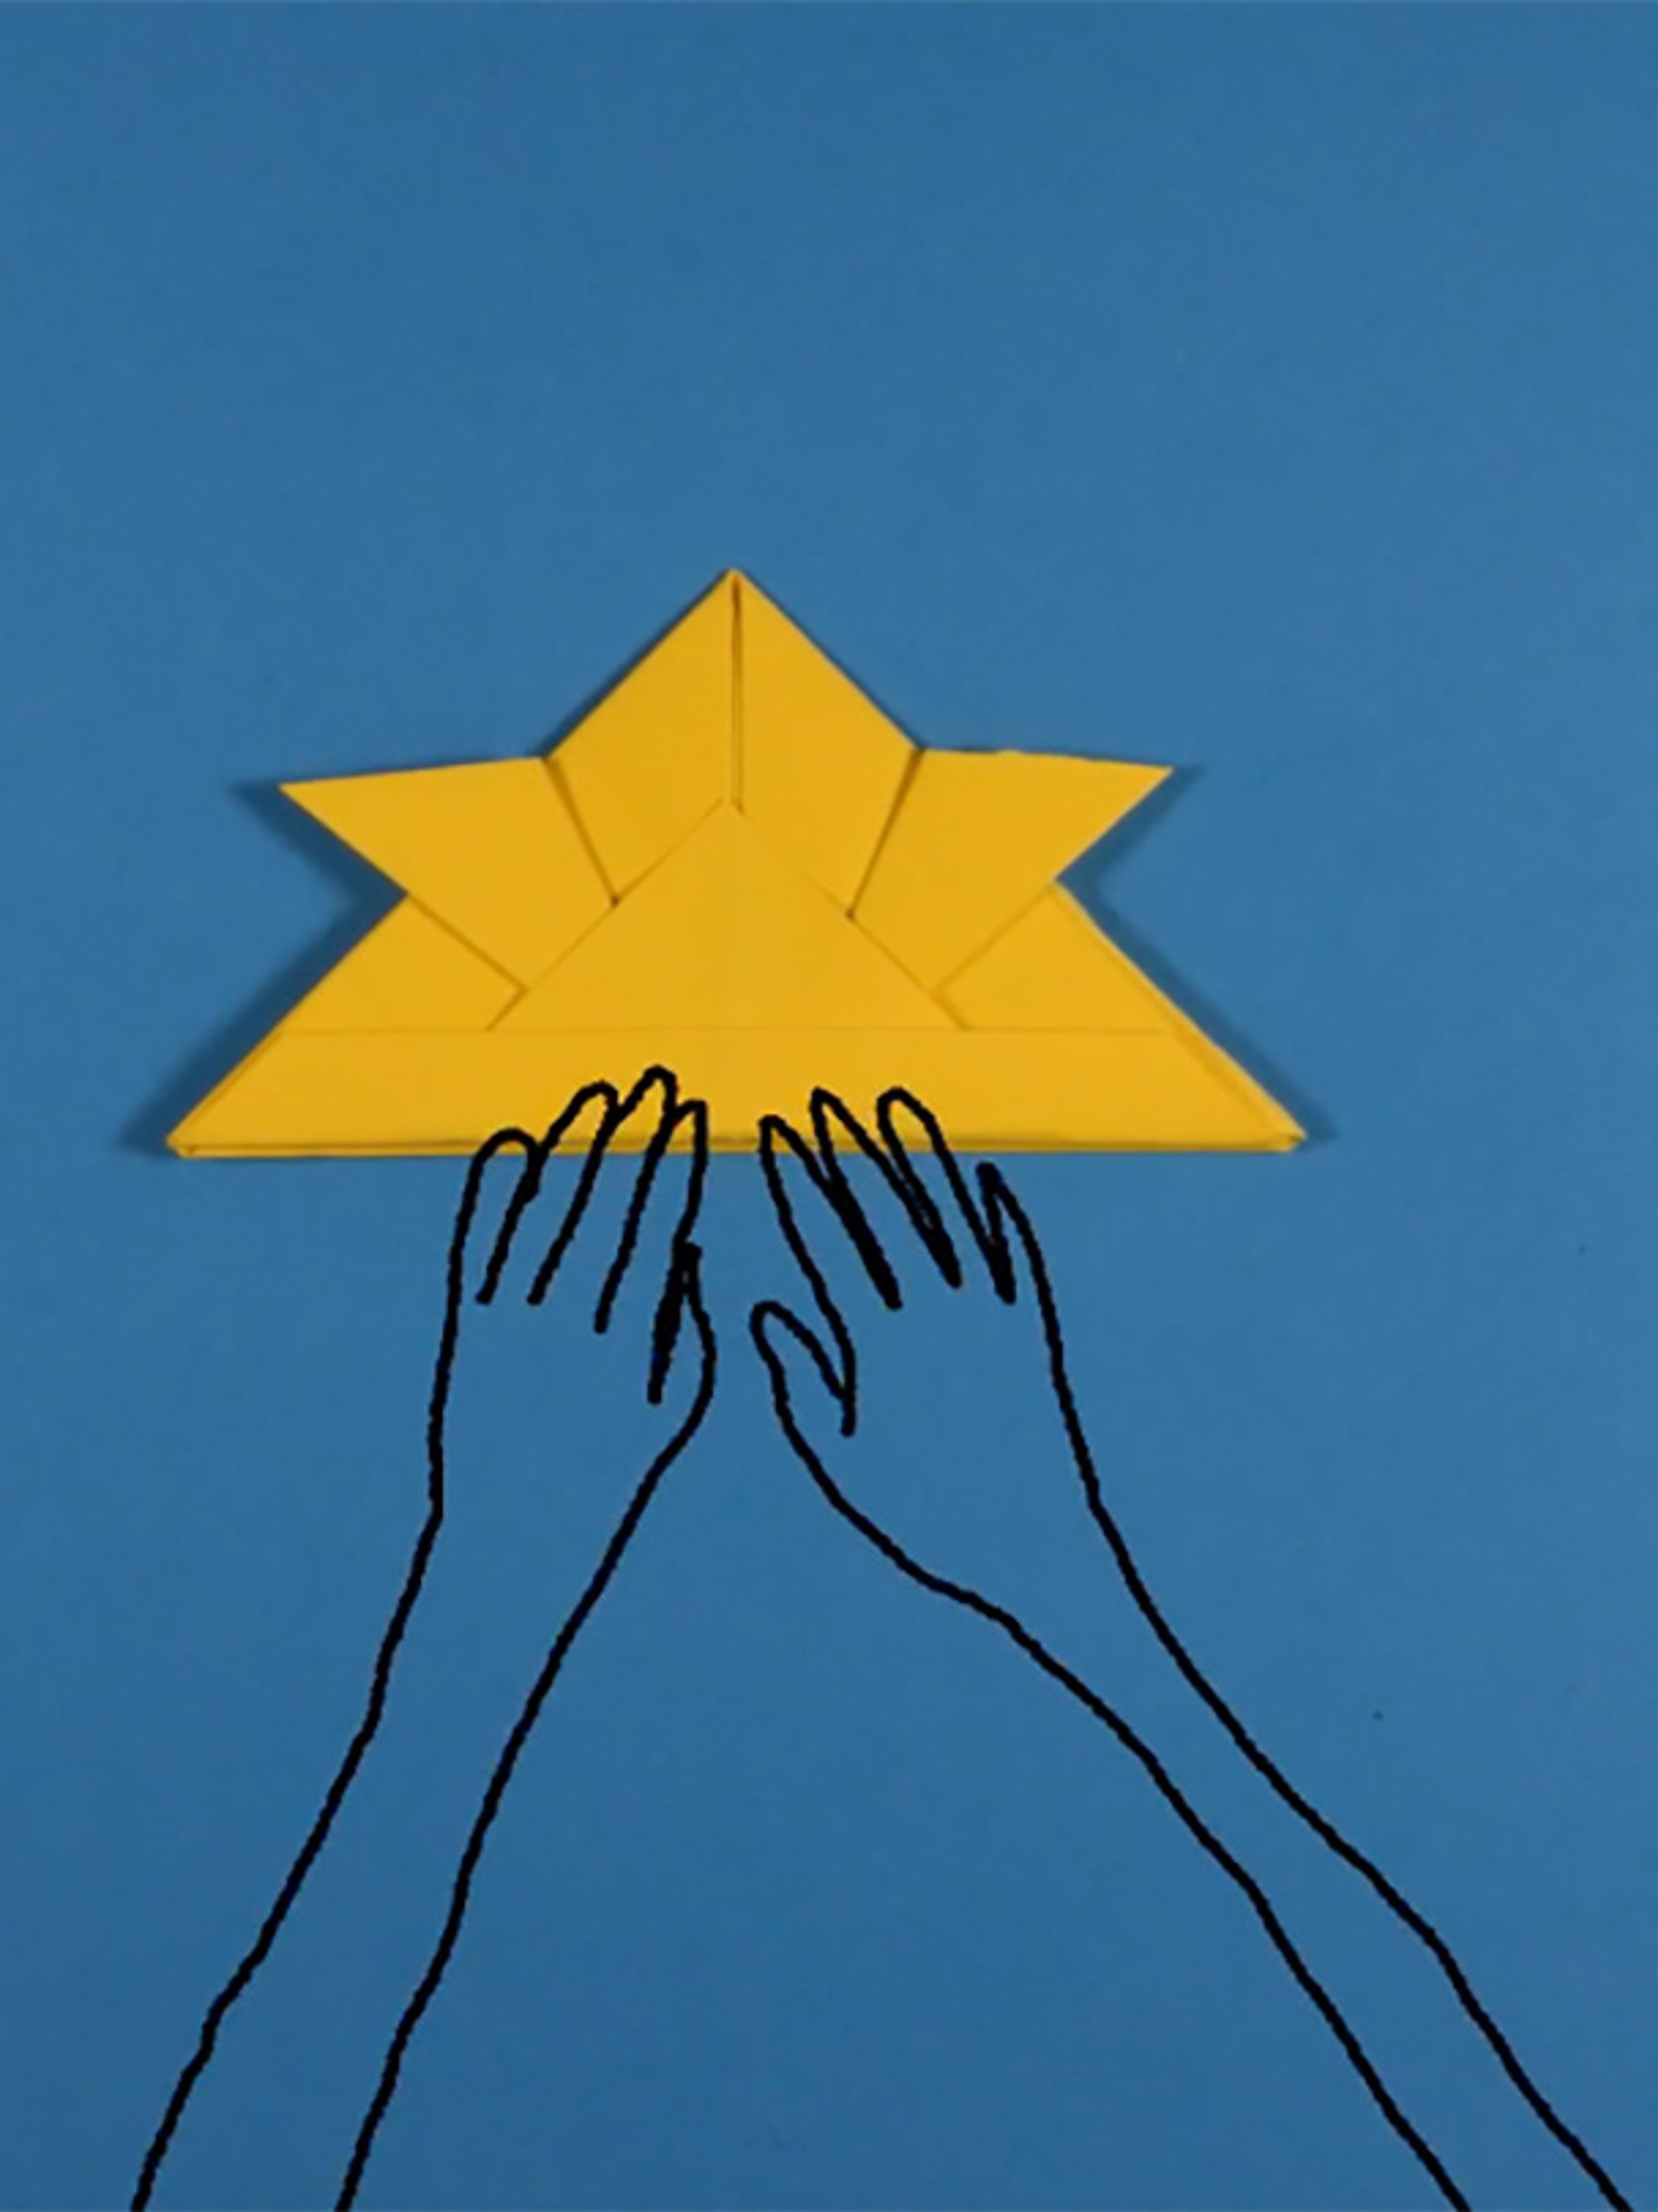 Animated hands work to fold a yellow oragami helmet placed on a blue background.